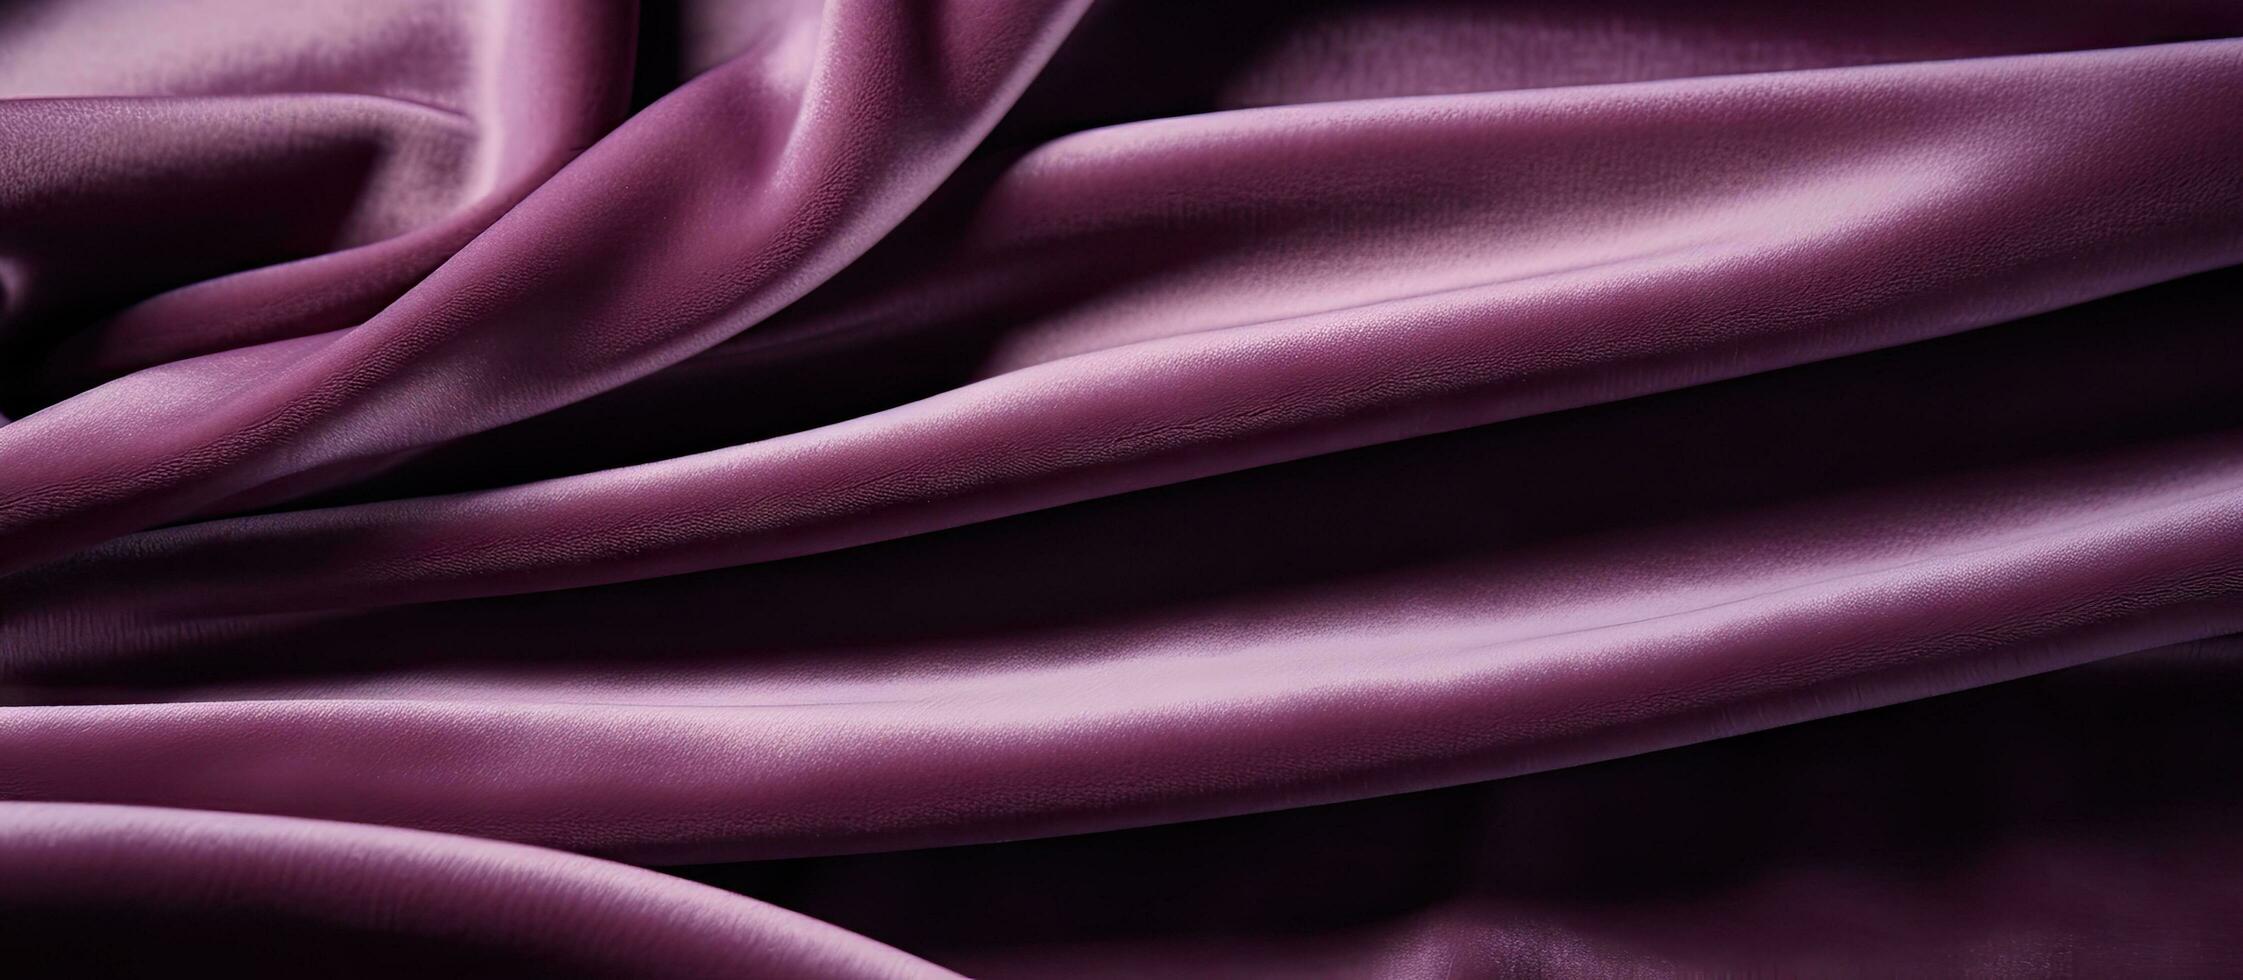 Sample of velour fabric in a plum color with a textured background photo